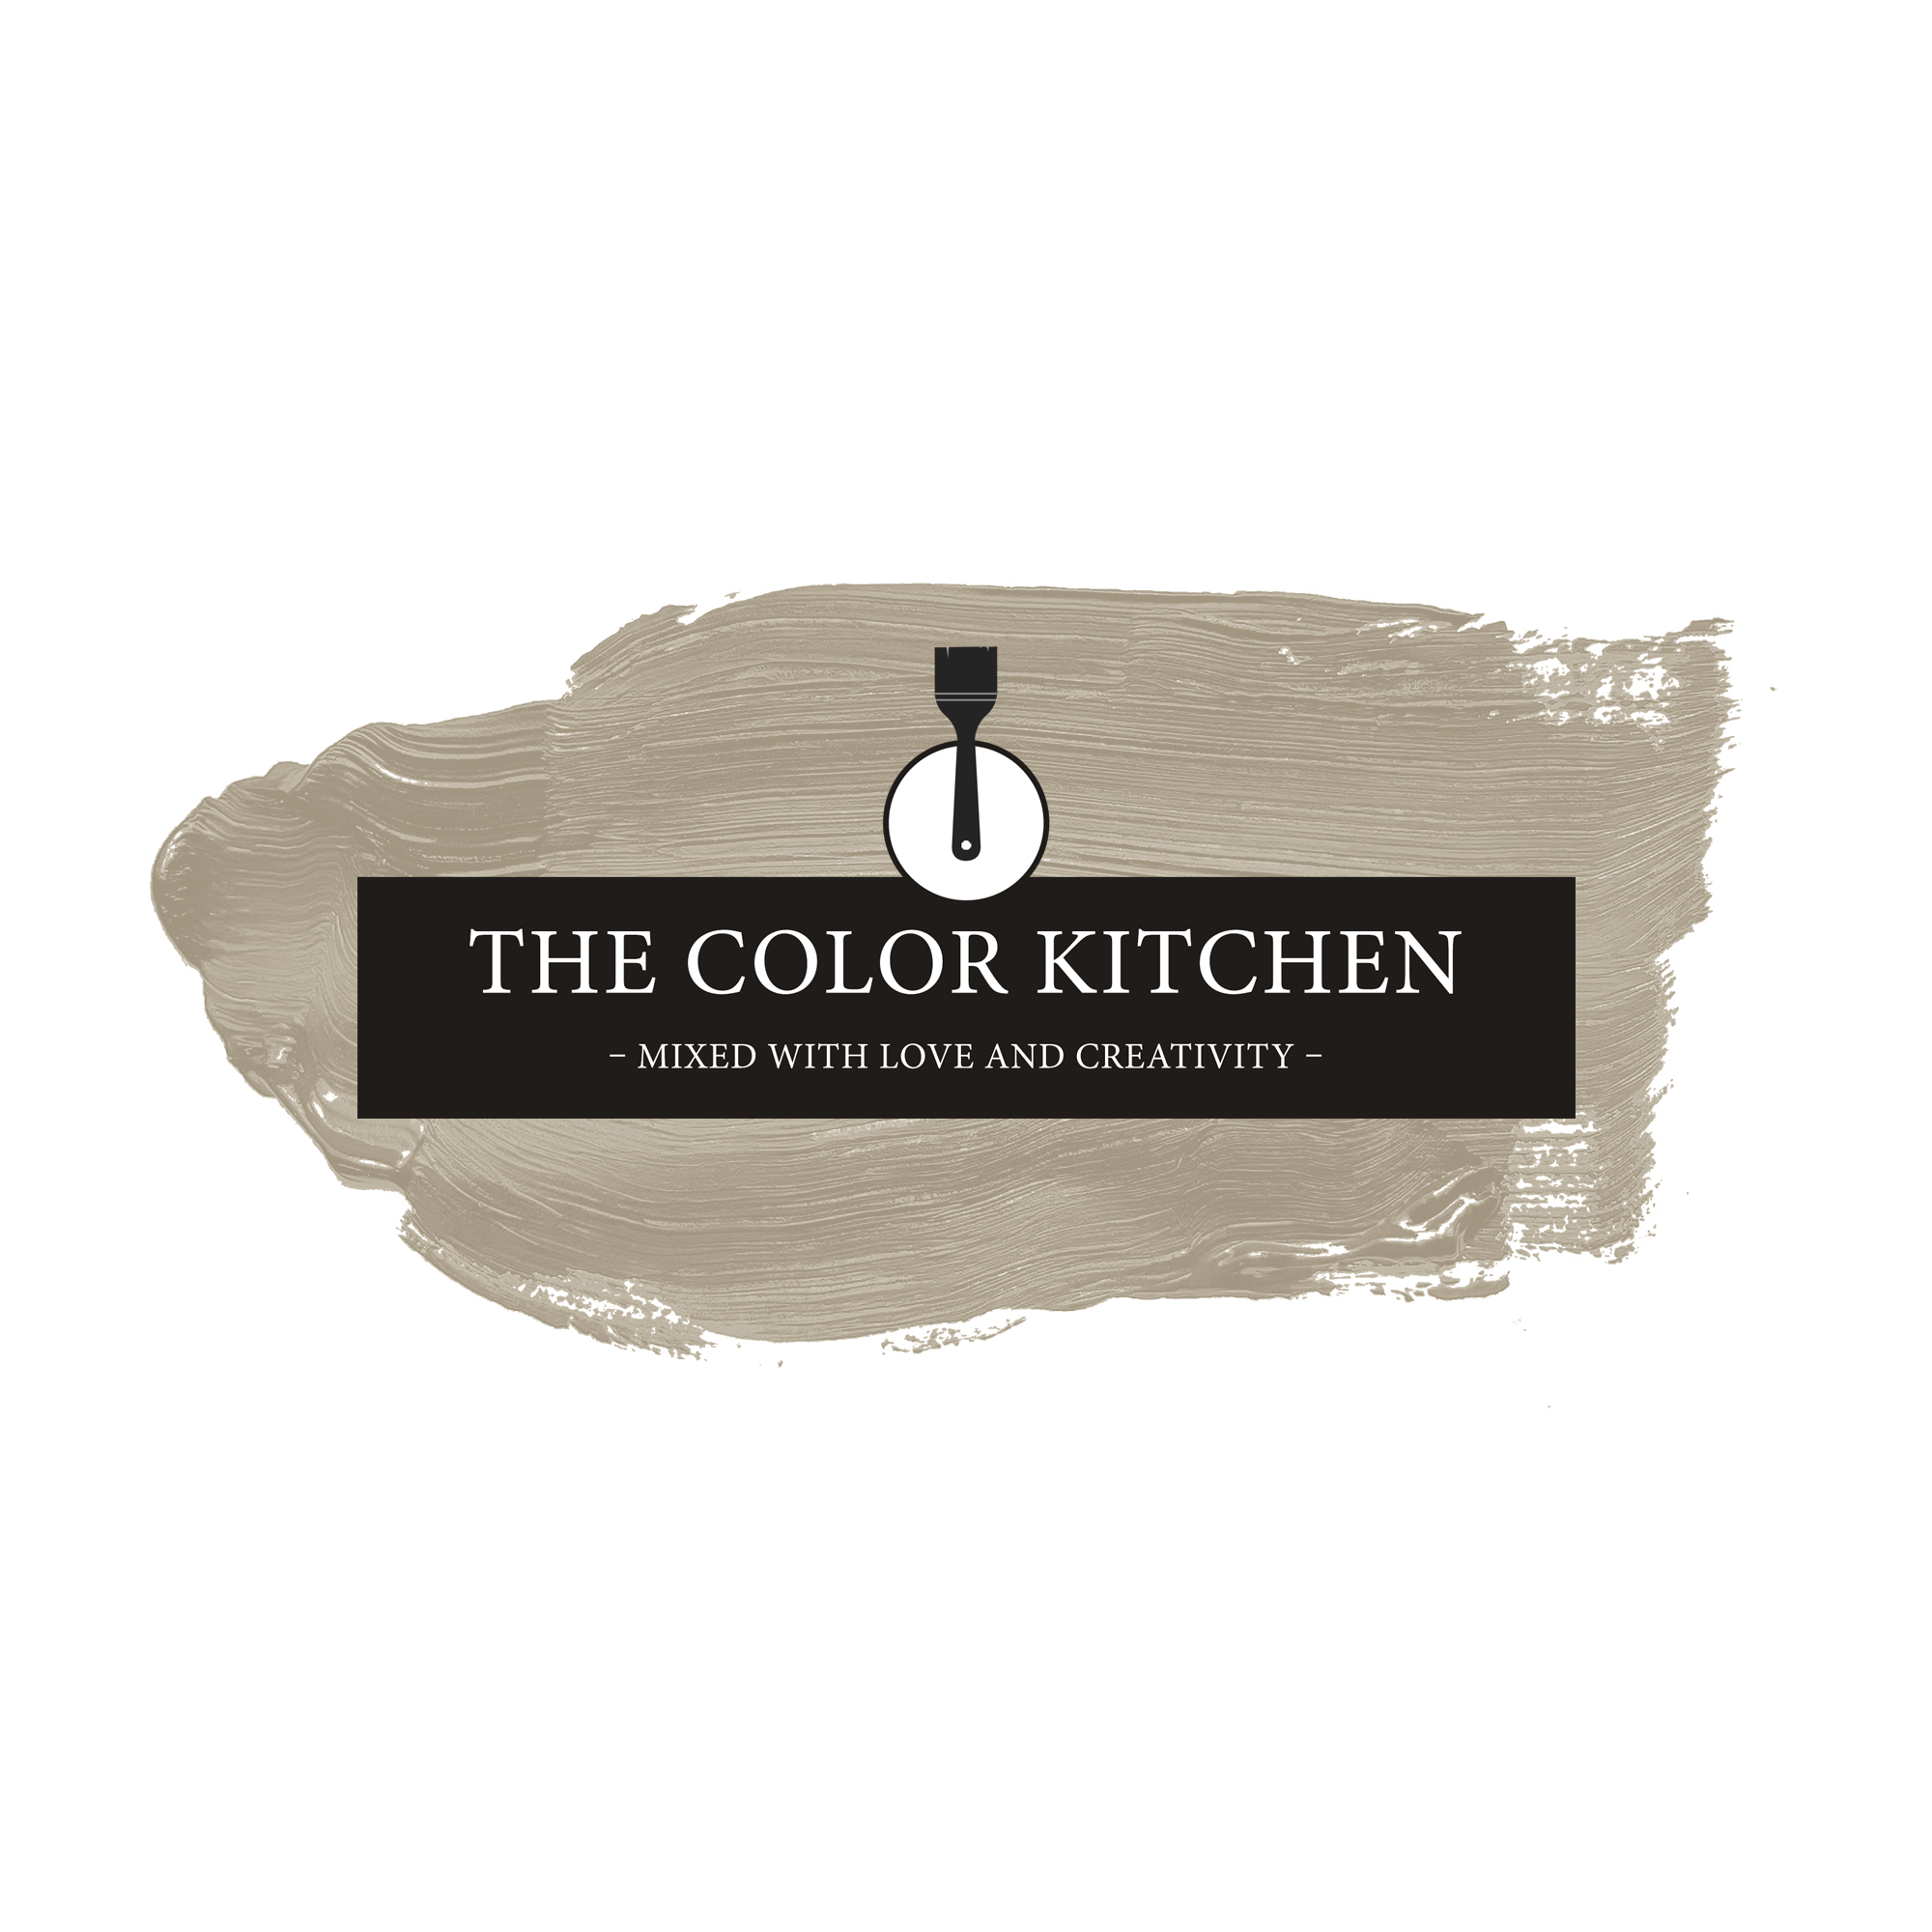 The Color Kitchen Pumpkin Seed 2,5 l